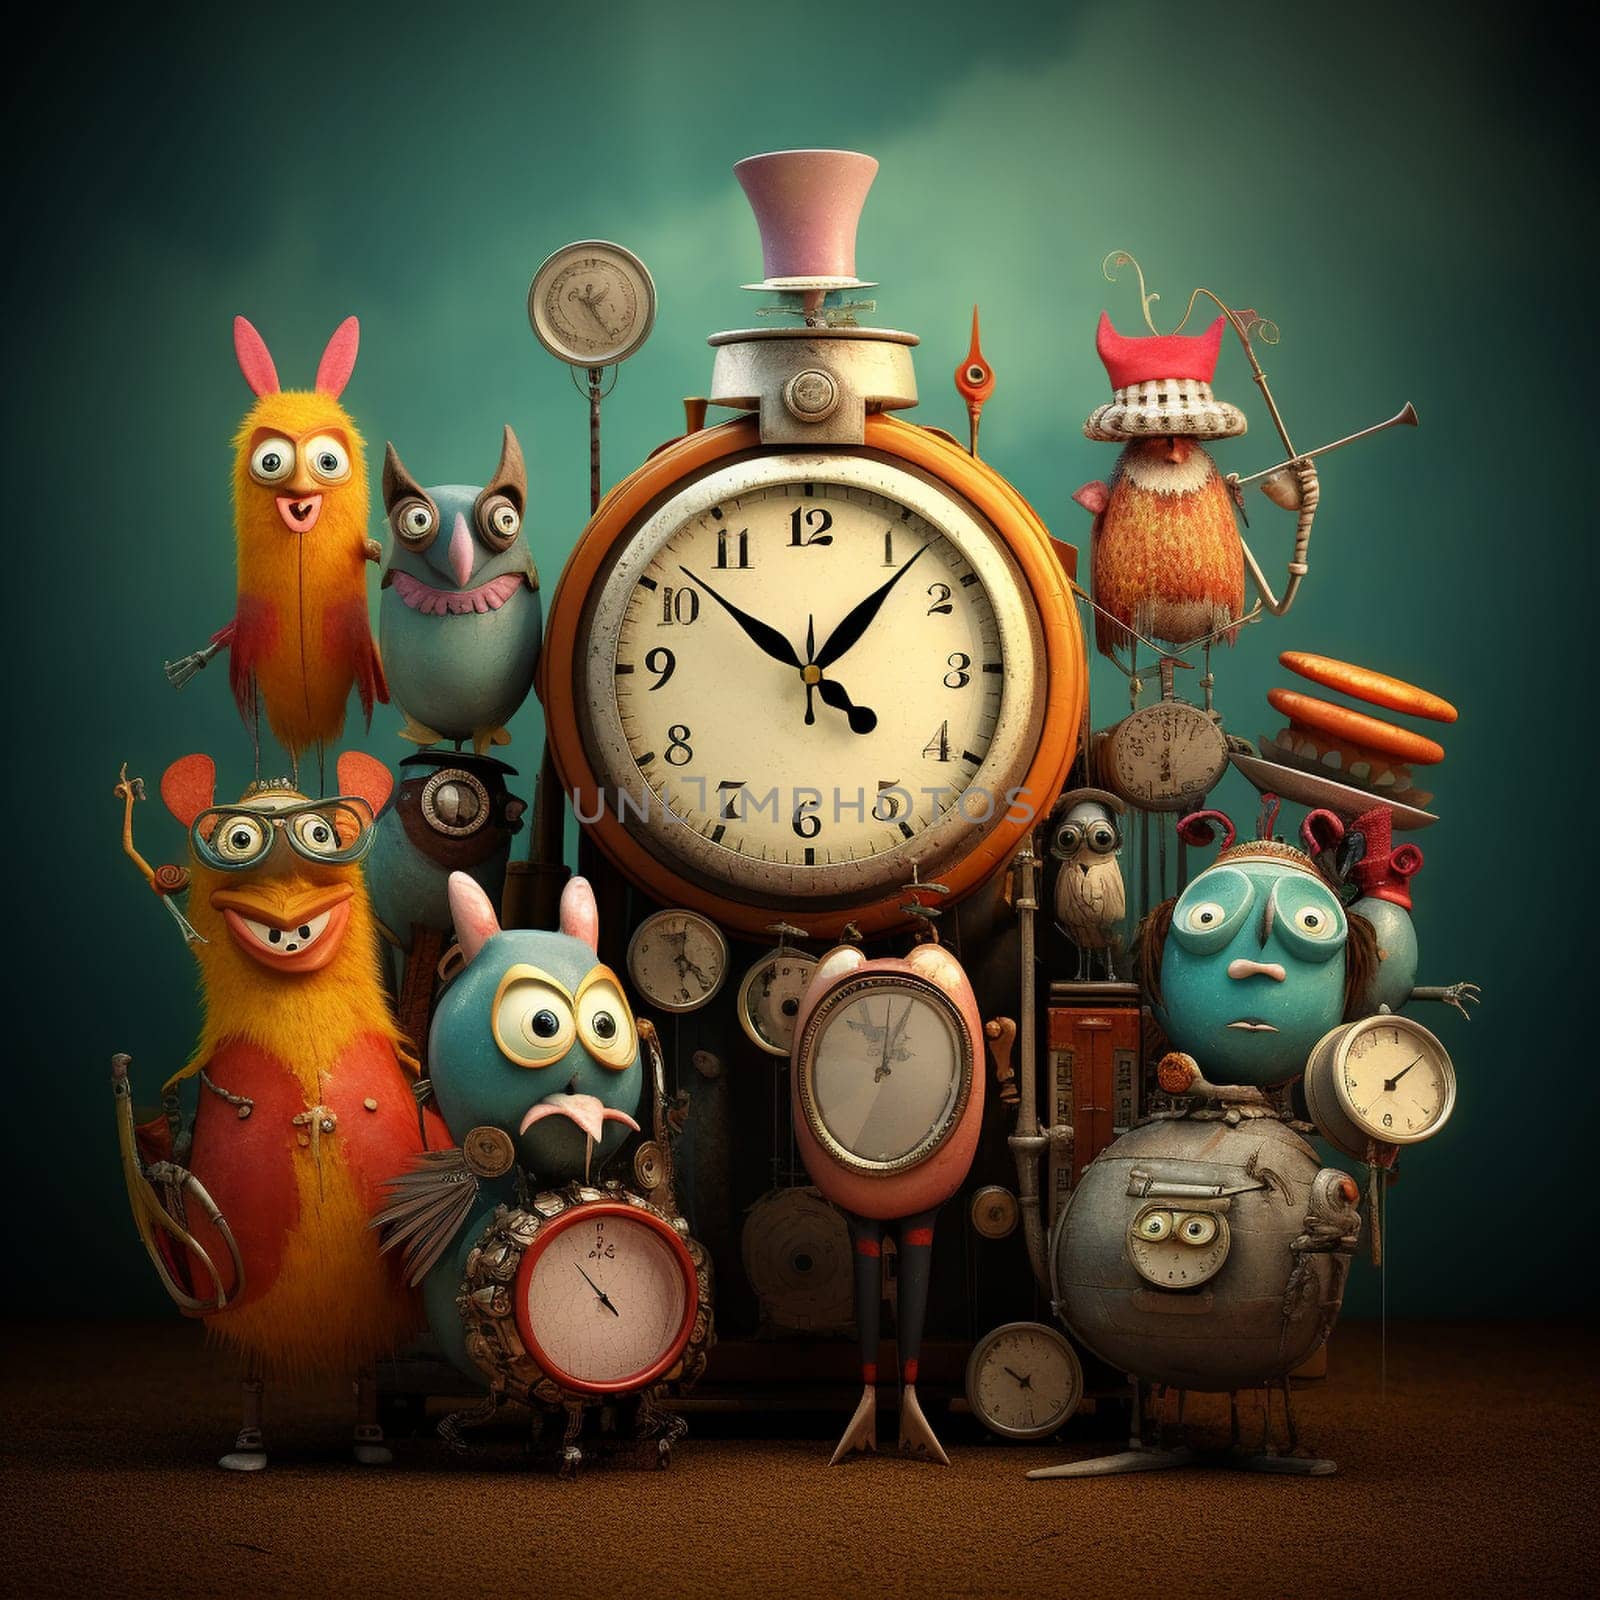 Step into the enchanting world of a whimsical vintage clock orchestra! Each clock in this captivating image is a unique instrument playing captivating beats. These clocks have their own personalities and styles, with intricate details and vibrant colors. They come to life with anthropomorphic qualities, featuring expressive faces, arms, and legs that enhance the sense of playfulness. The clocks are placed in a whimsical setting, such as a music hall or a forest clearing, surrounded by an enchanted audience of diverse creatures, including animals, mythical creatures, and abstract beings. The image showcases a retro aesthetic with warm, nostalgic tones, delicate textures, and artistic flourishes that evoke a sense of timeless charm.